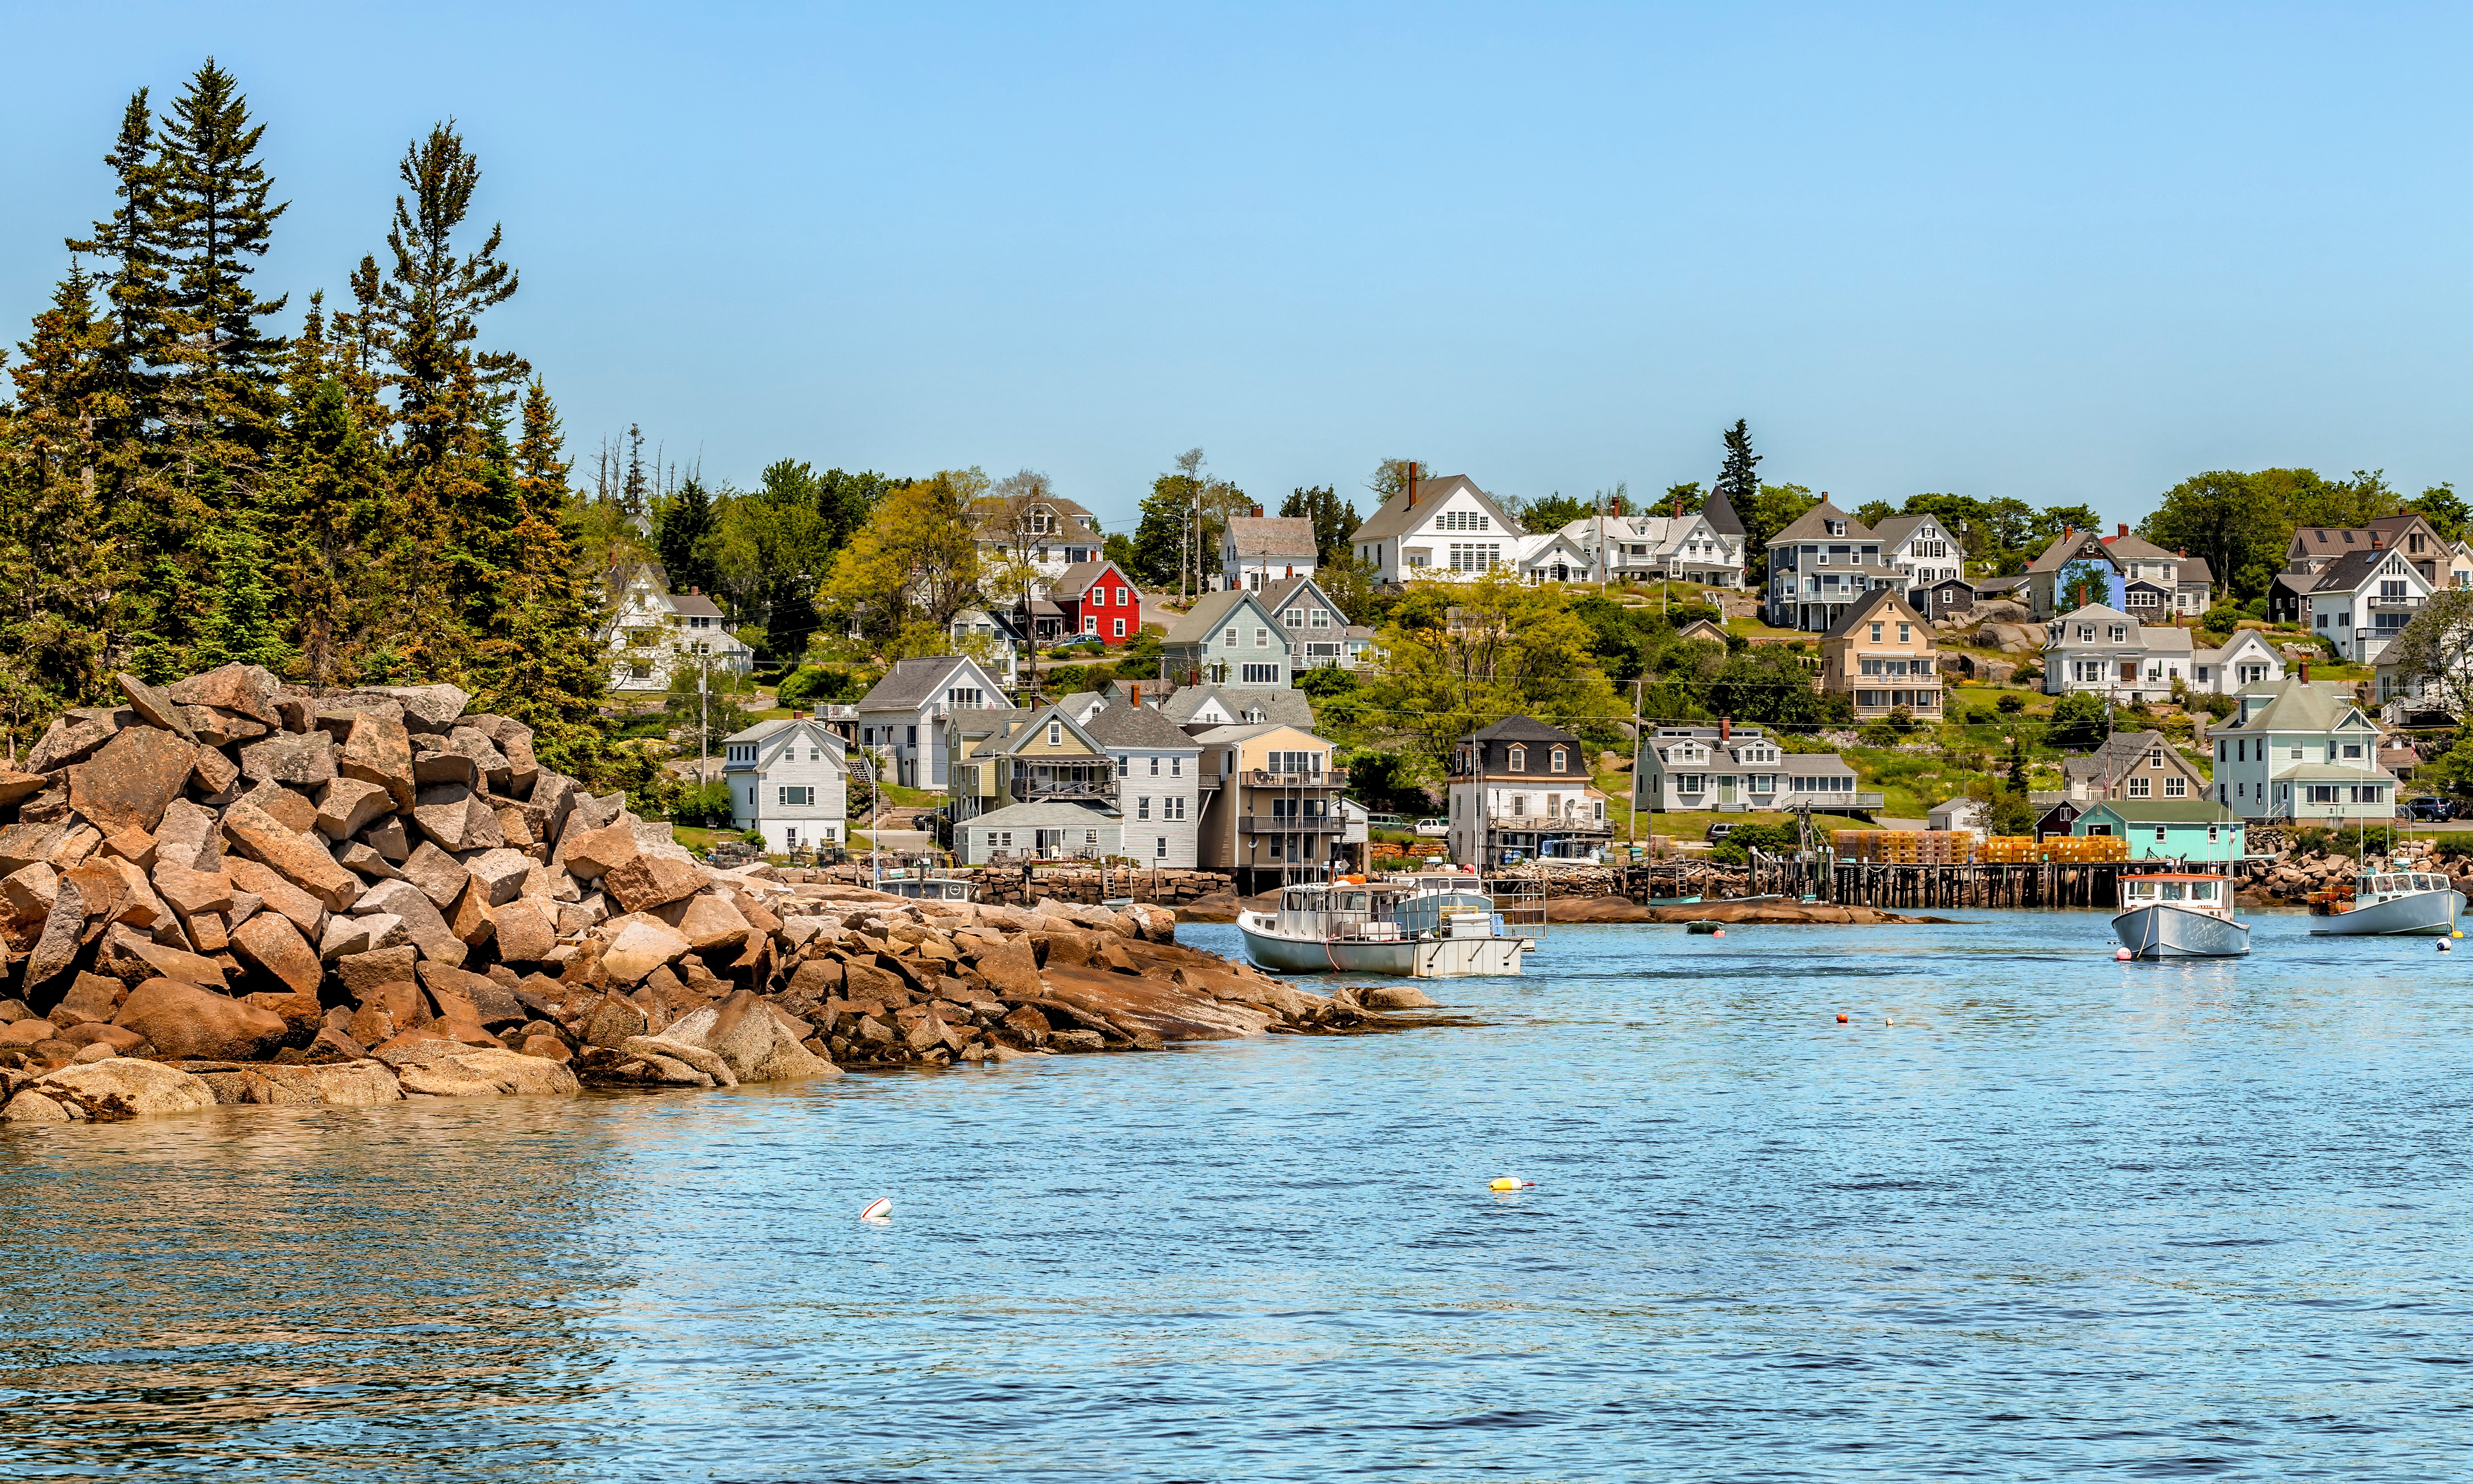 New England Vacation Rentals, Homes and More